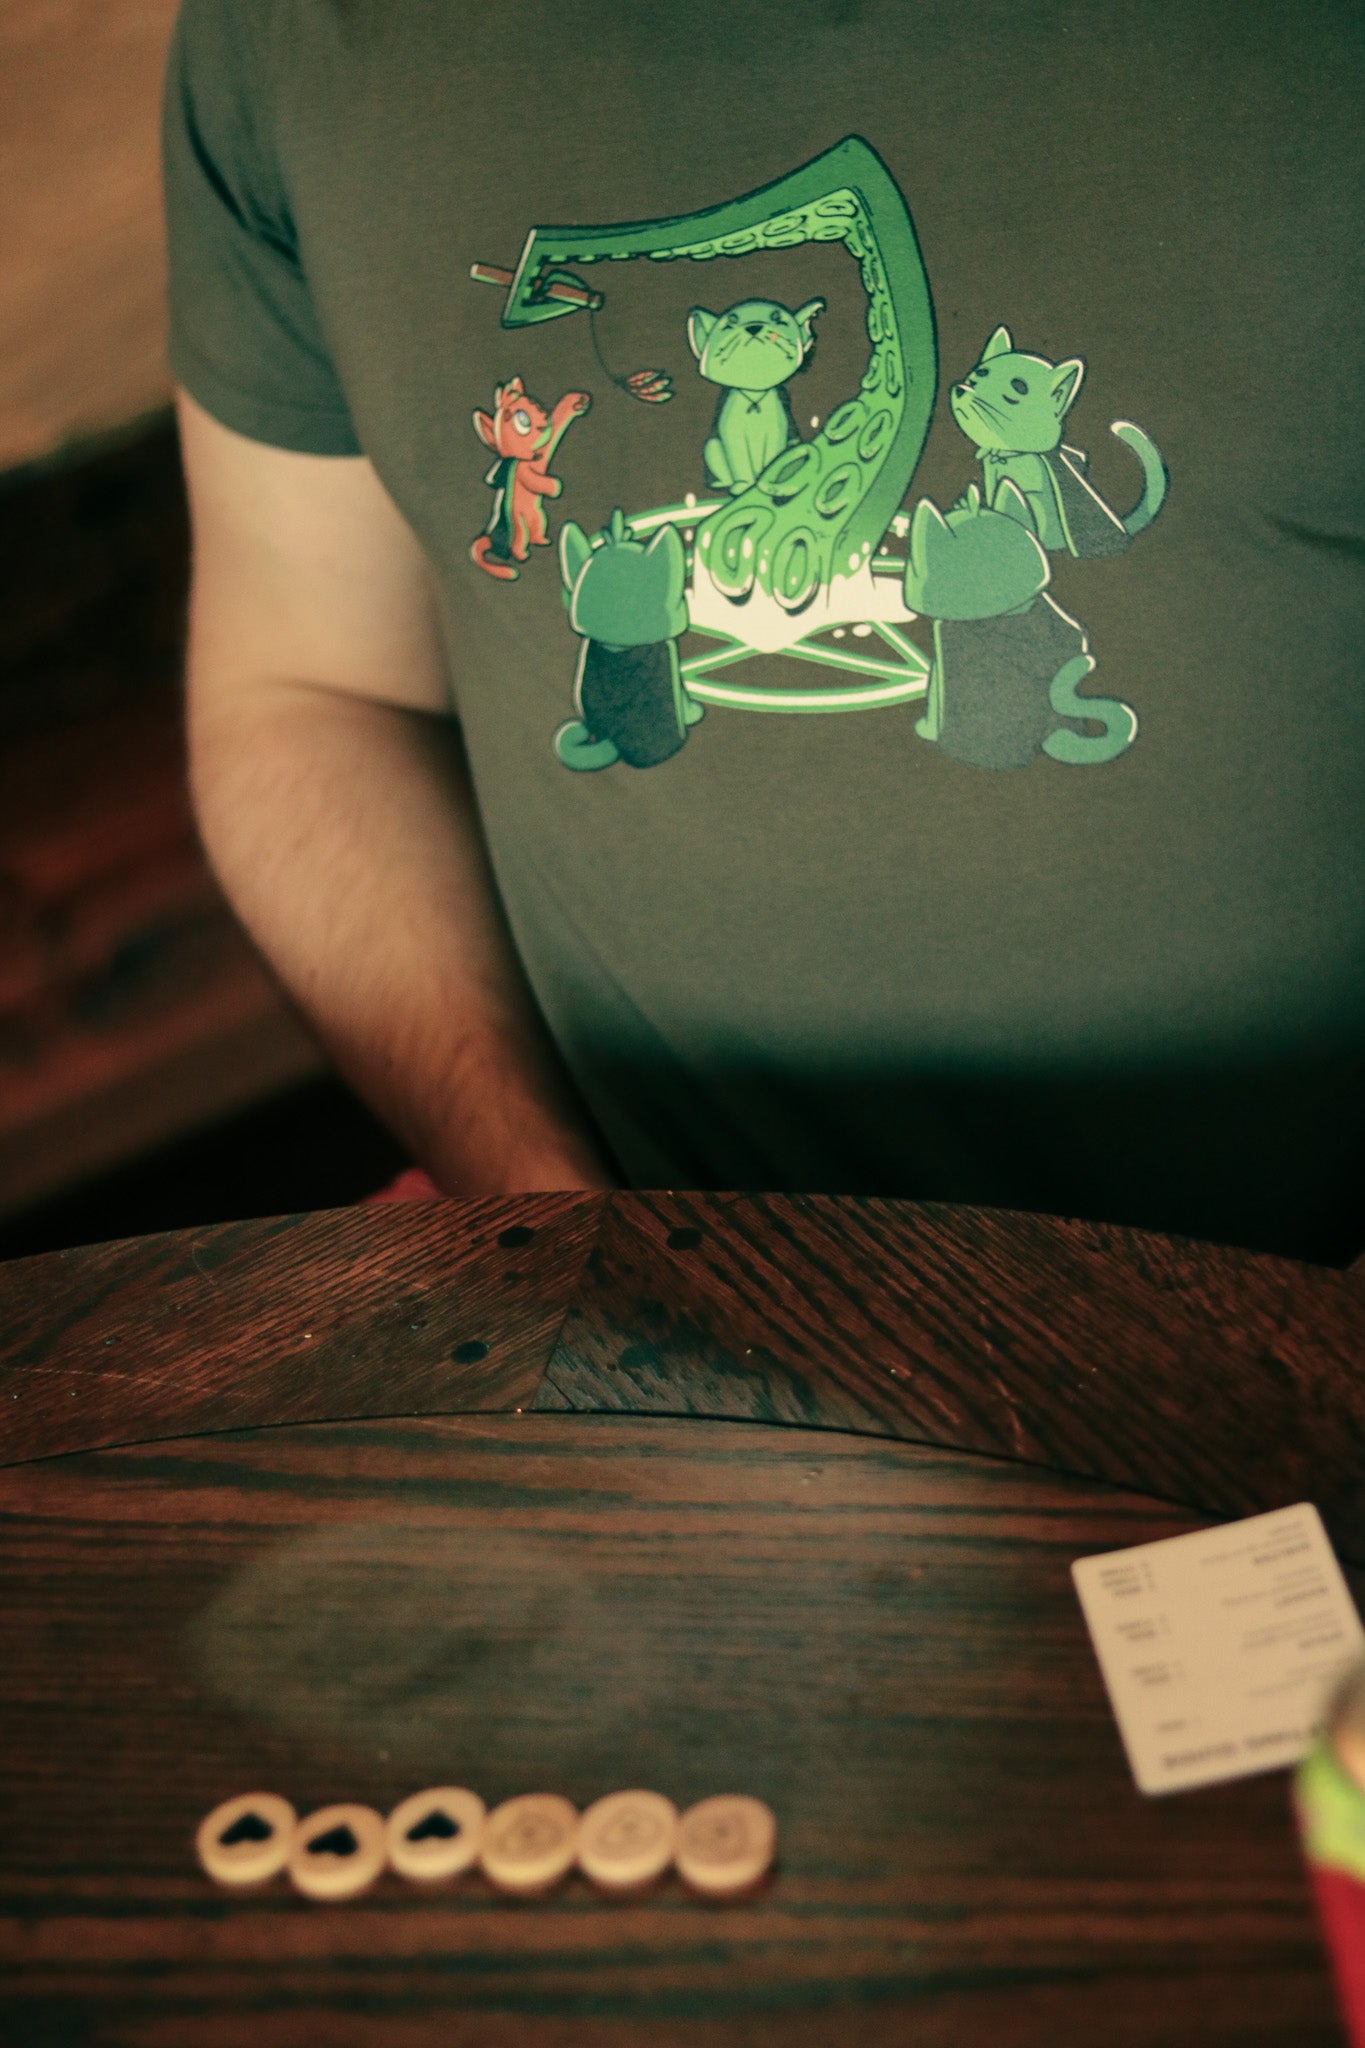 Person close up of chest wearing t-shirt featuring 5 cats summoning a tentacle, one an orange cat playing with a feather toy held by the tentacle